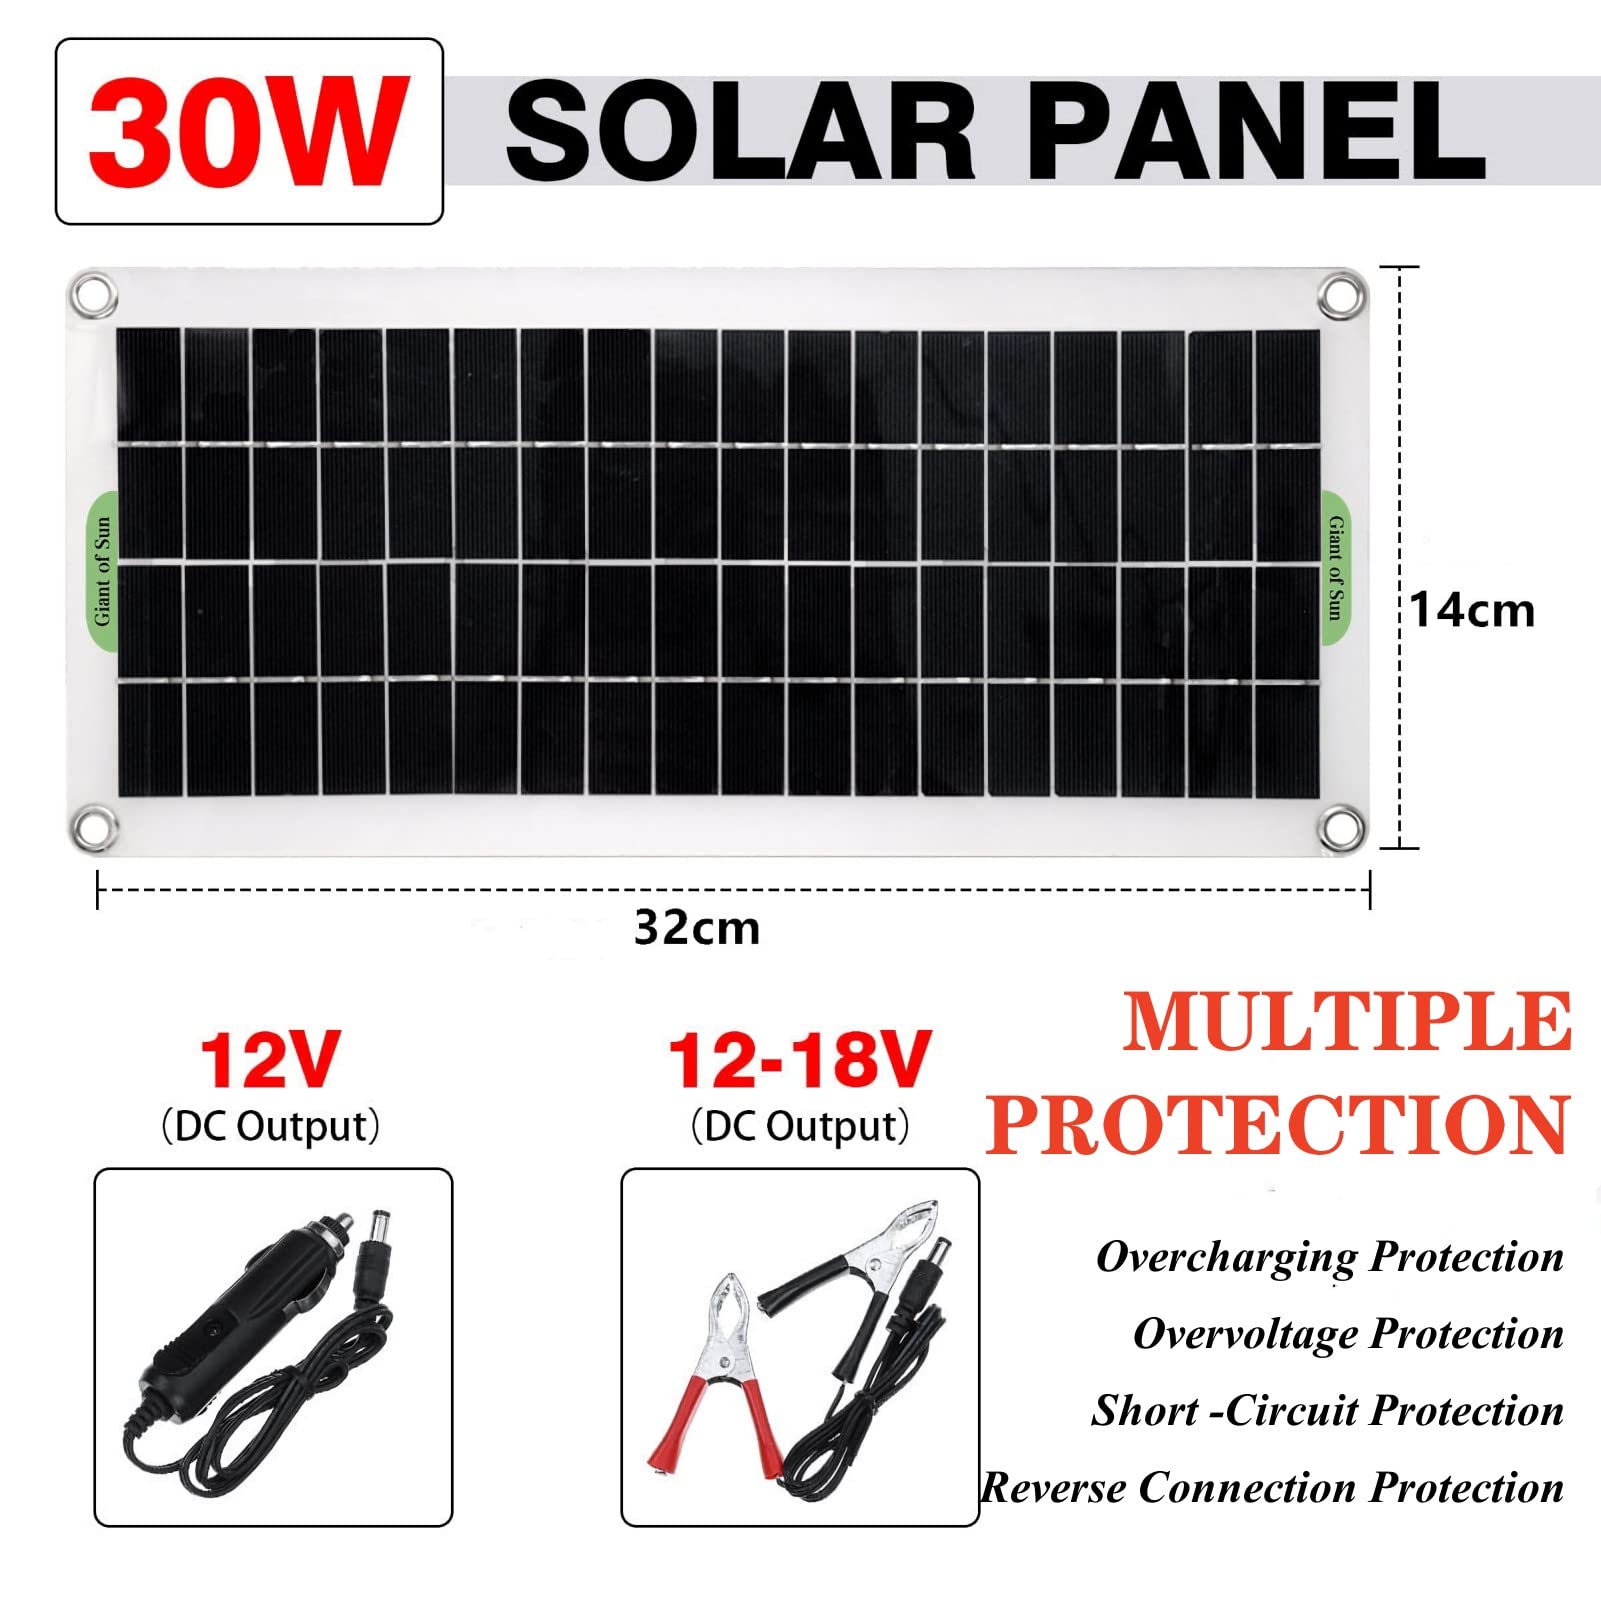 Cryfokt 30W 12V 24V Solar Panel Kit, Solar Panel Maintainer with Voltage Controller and SAE Cable Adapters, Solar Battery for Car, RV, Boat, Marine, Trailer